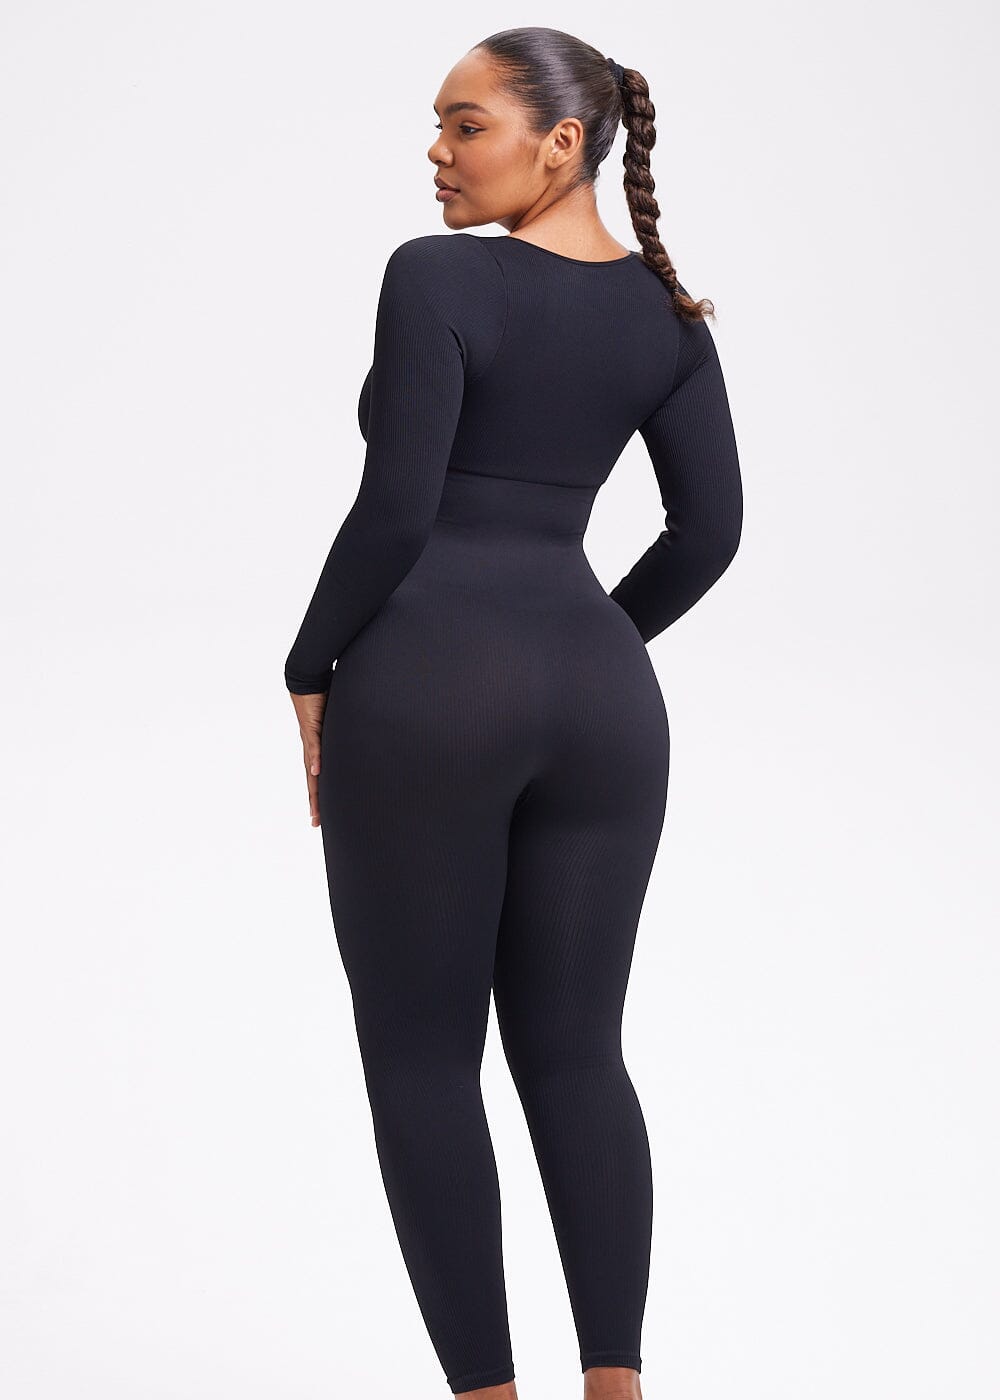 Snatching Jumpsuit Long Sleeve - She's Waisted